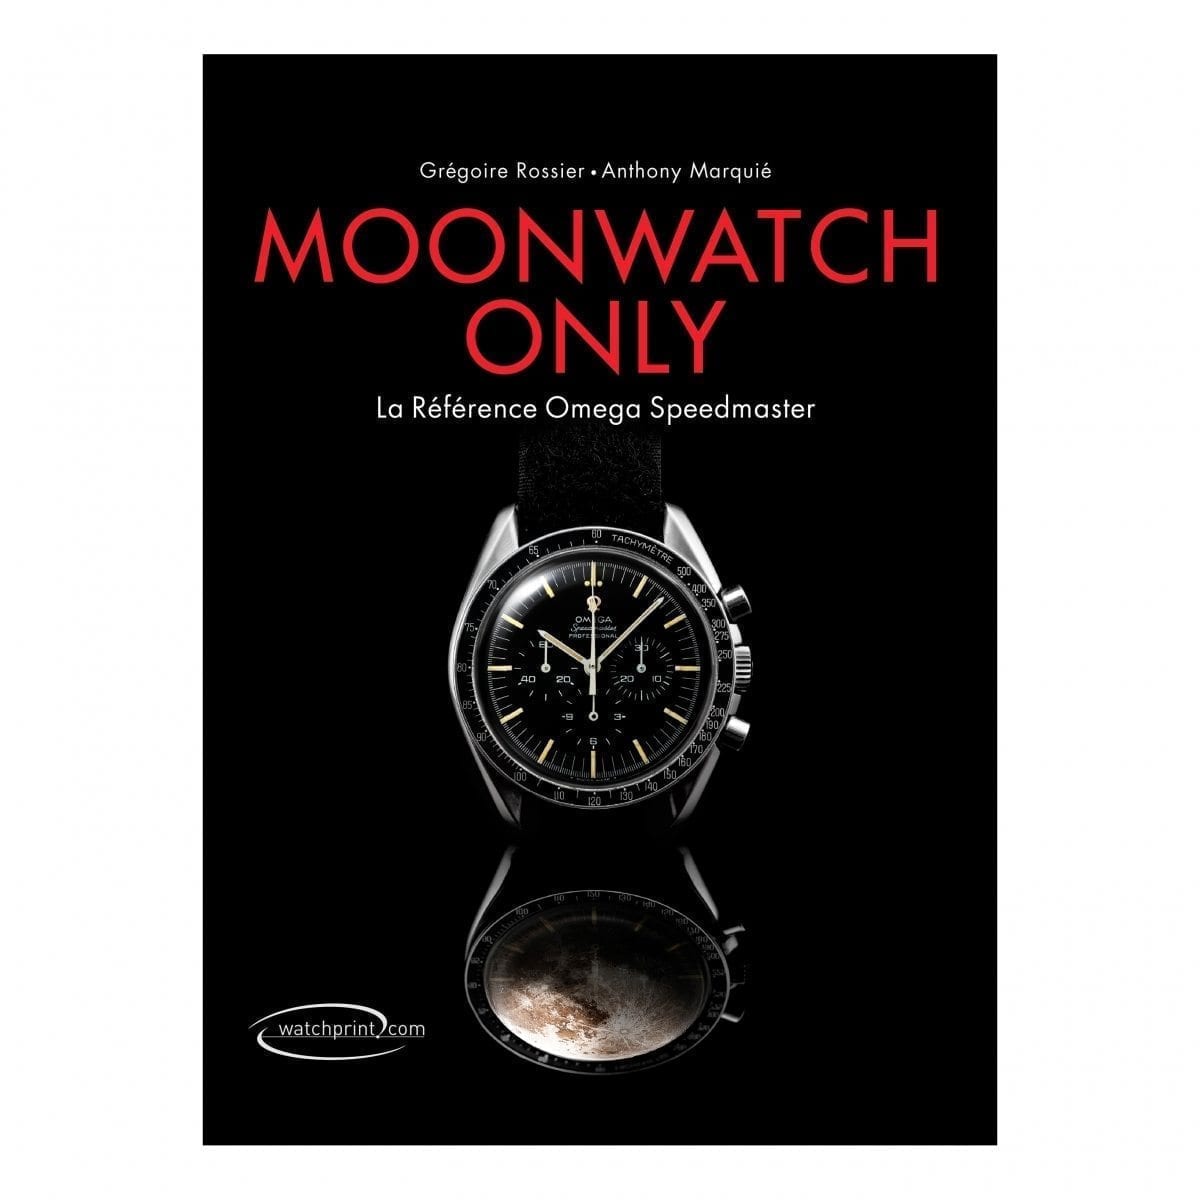 Moonwatch only